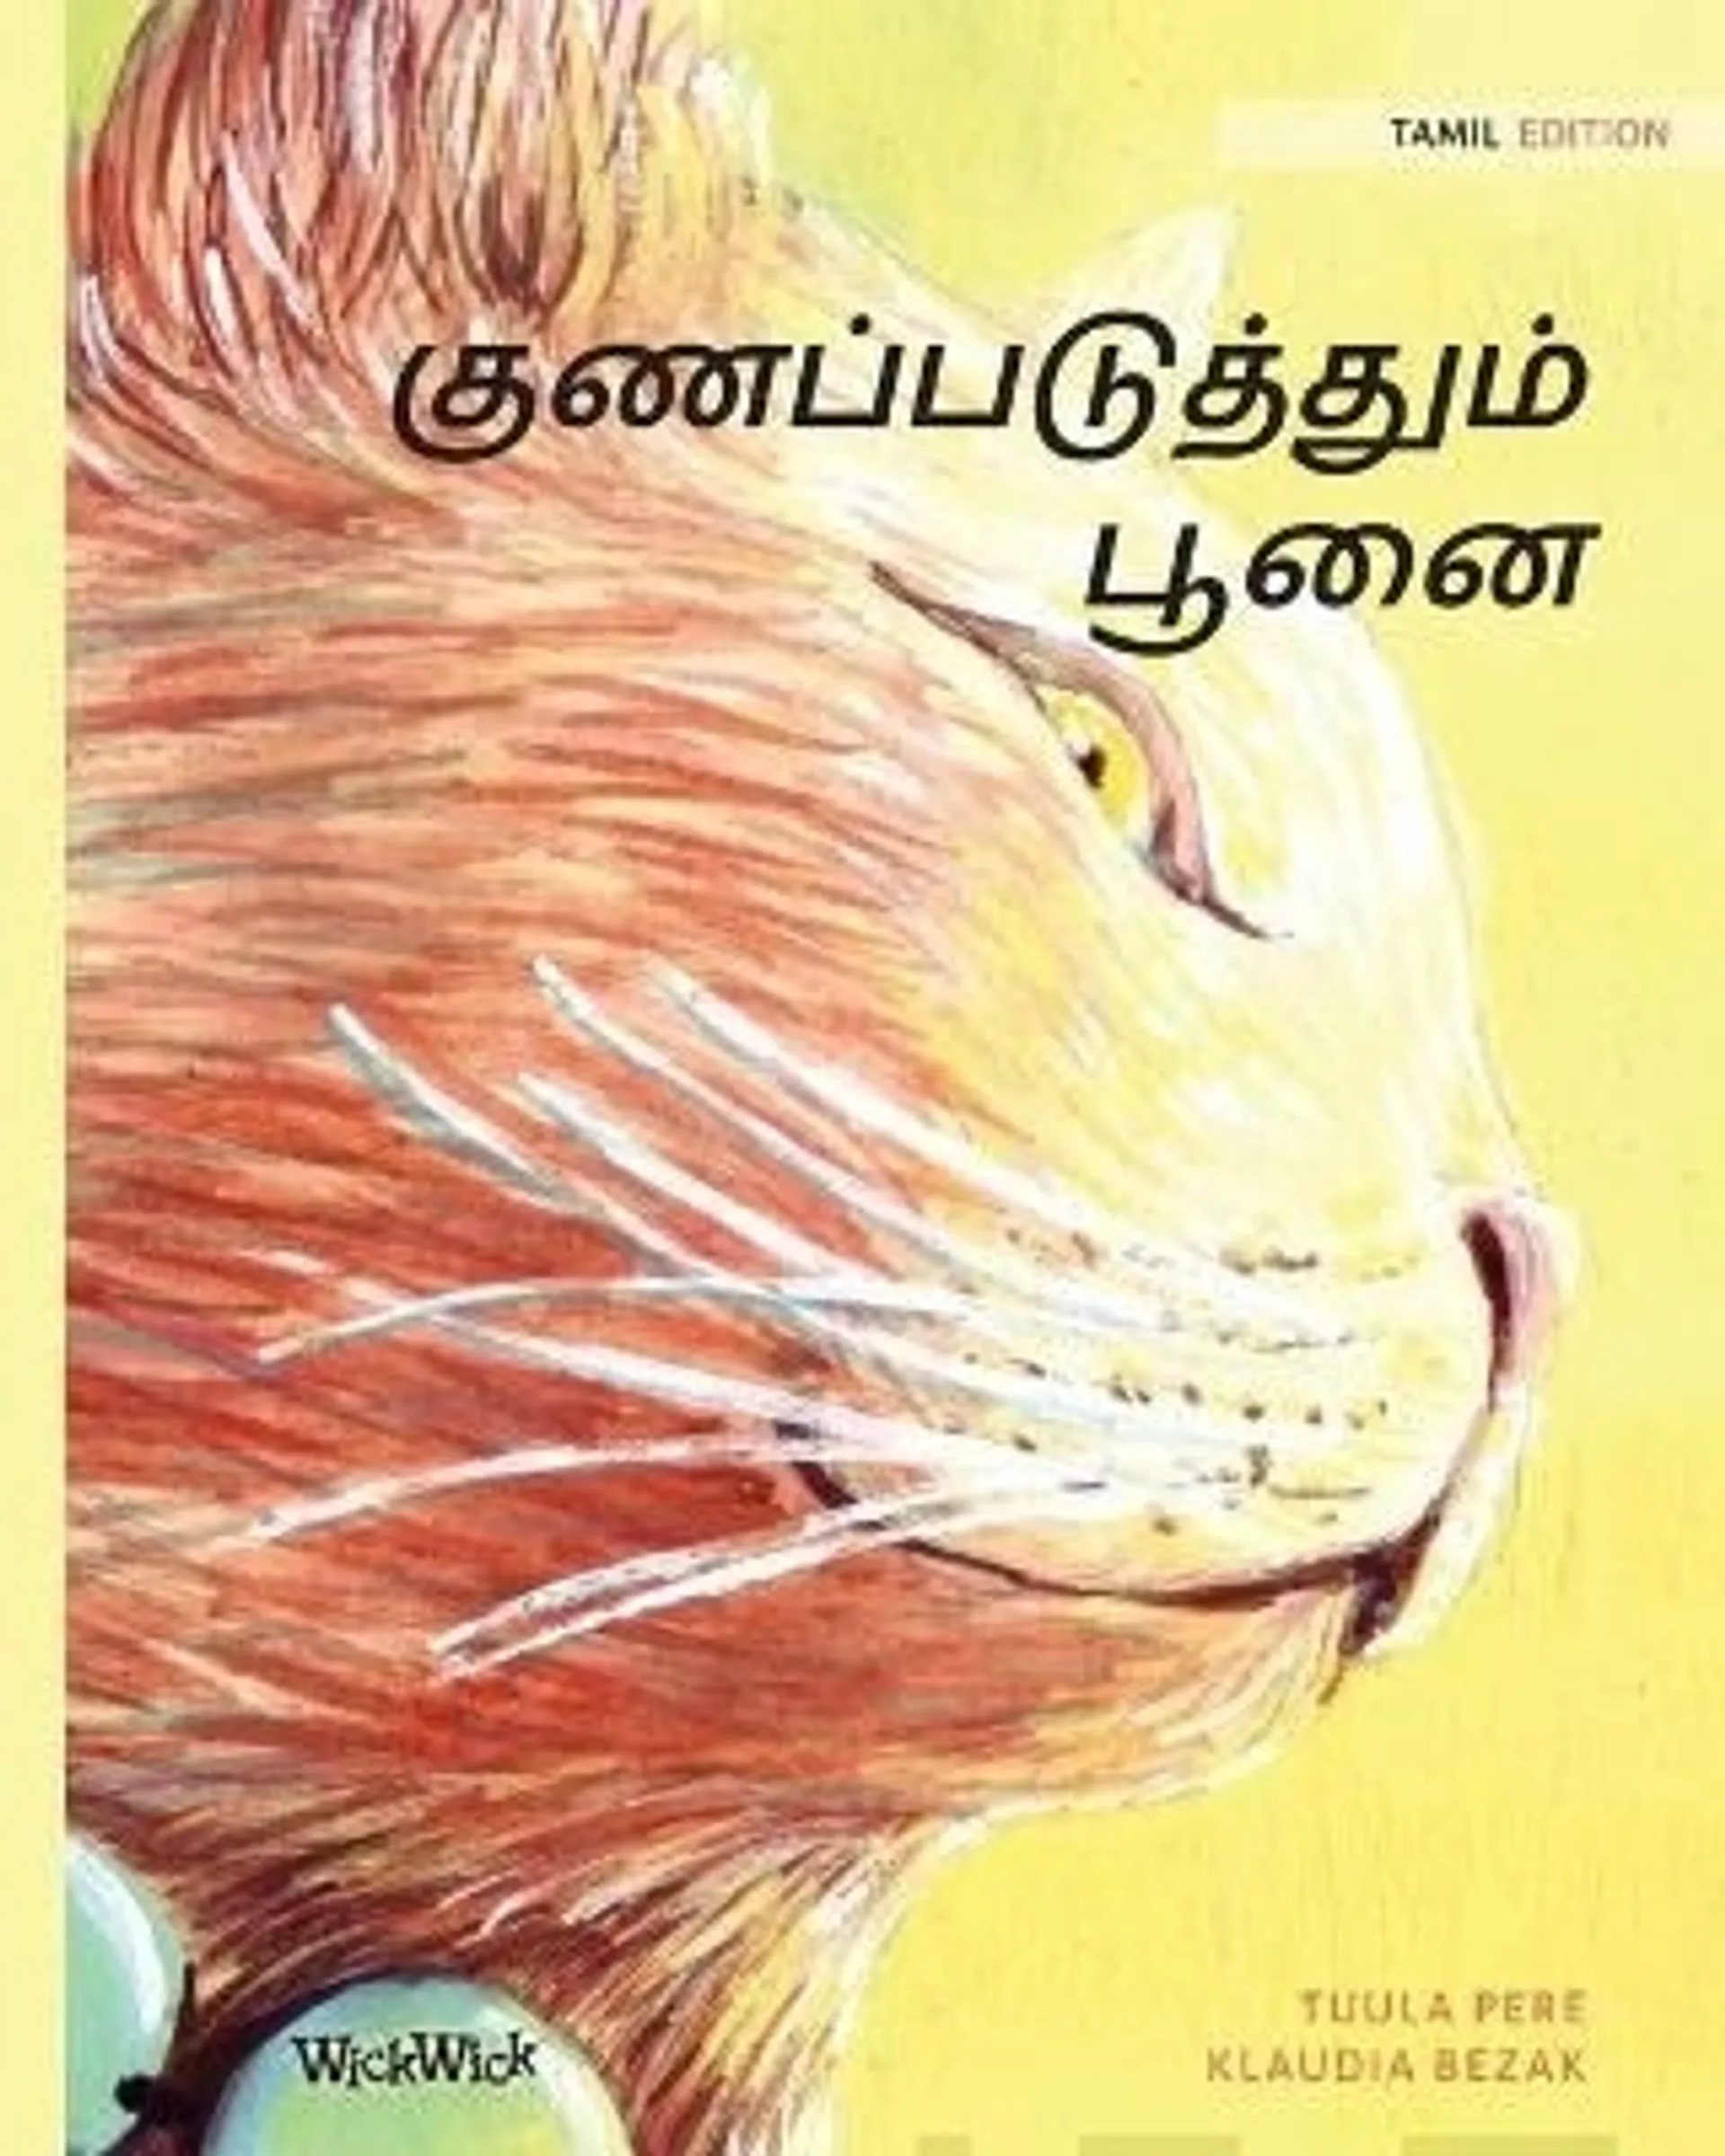 Pere, Tamil Edition of The Healer Cat